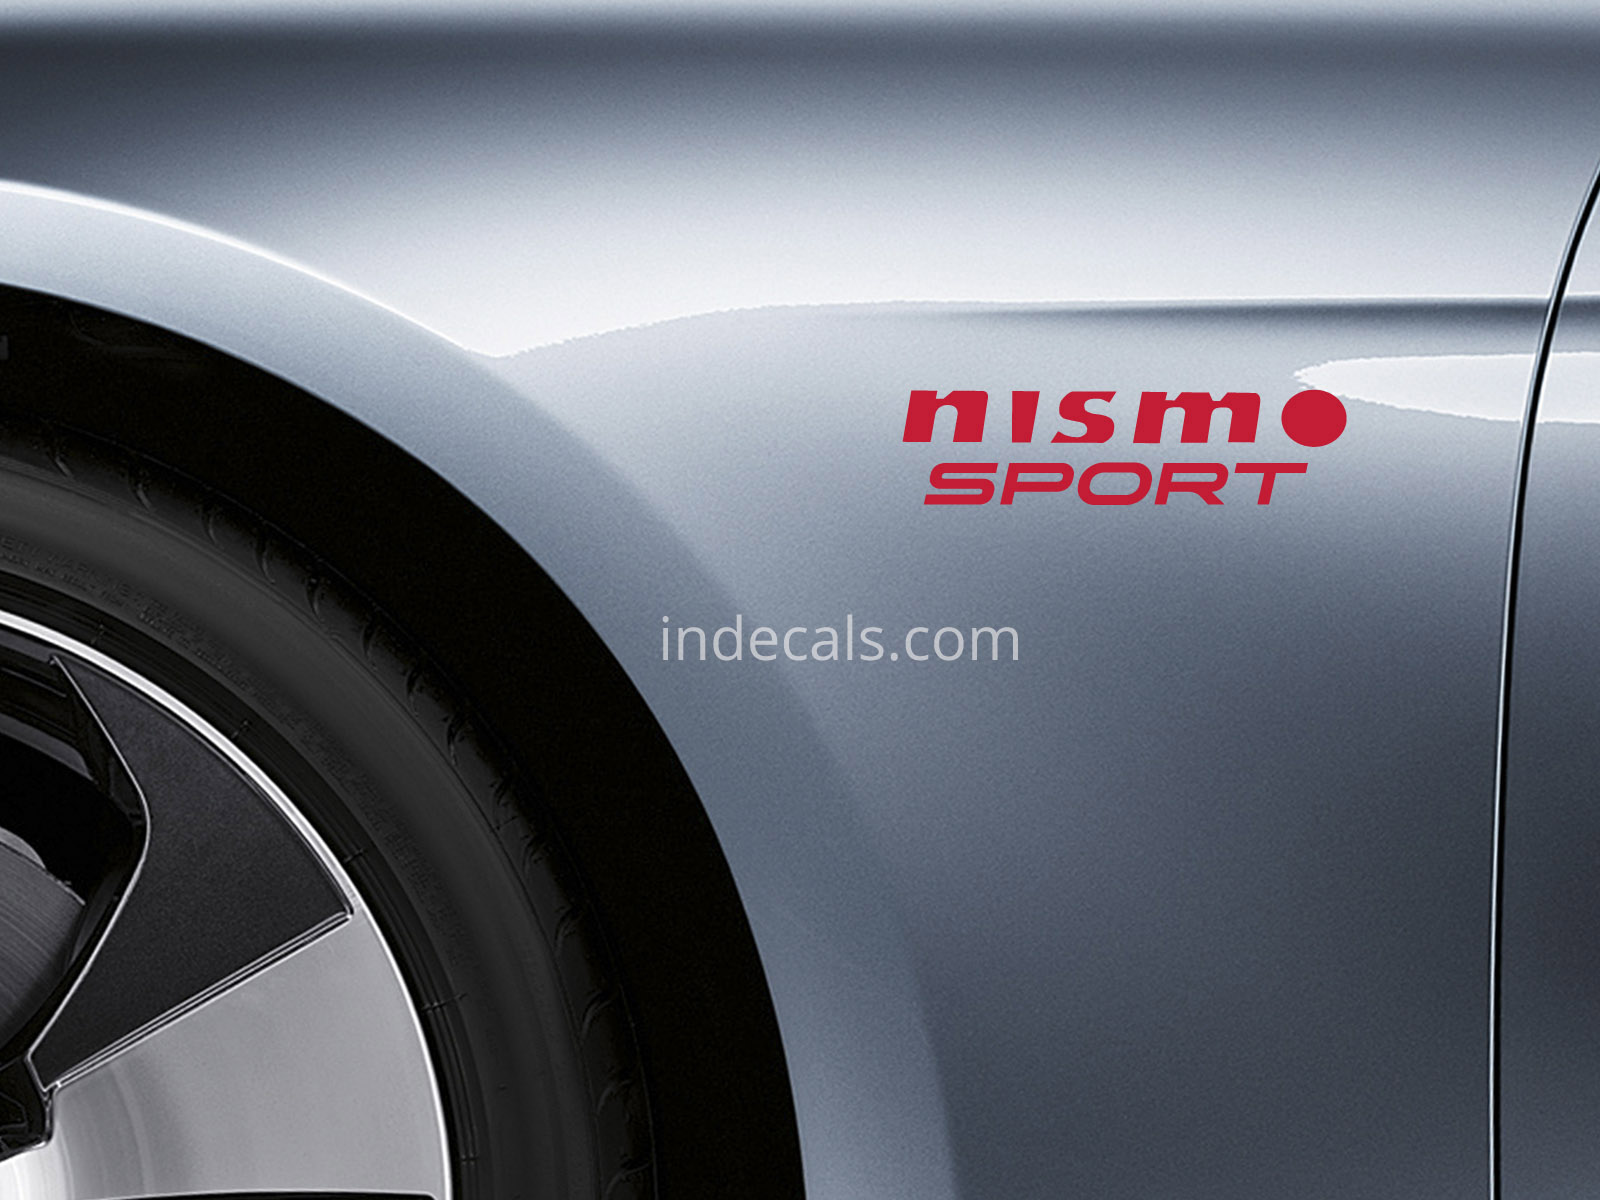 2 x Nismo Sports stickers for Wings - Red